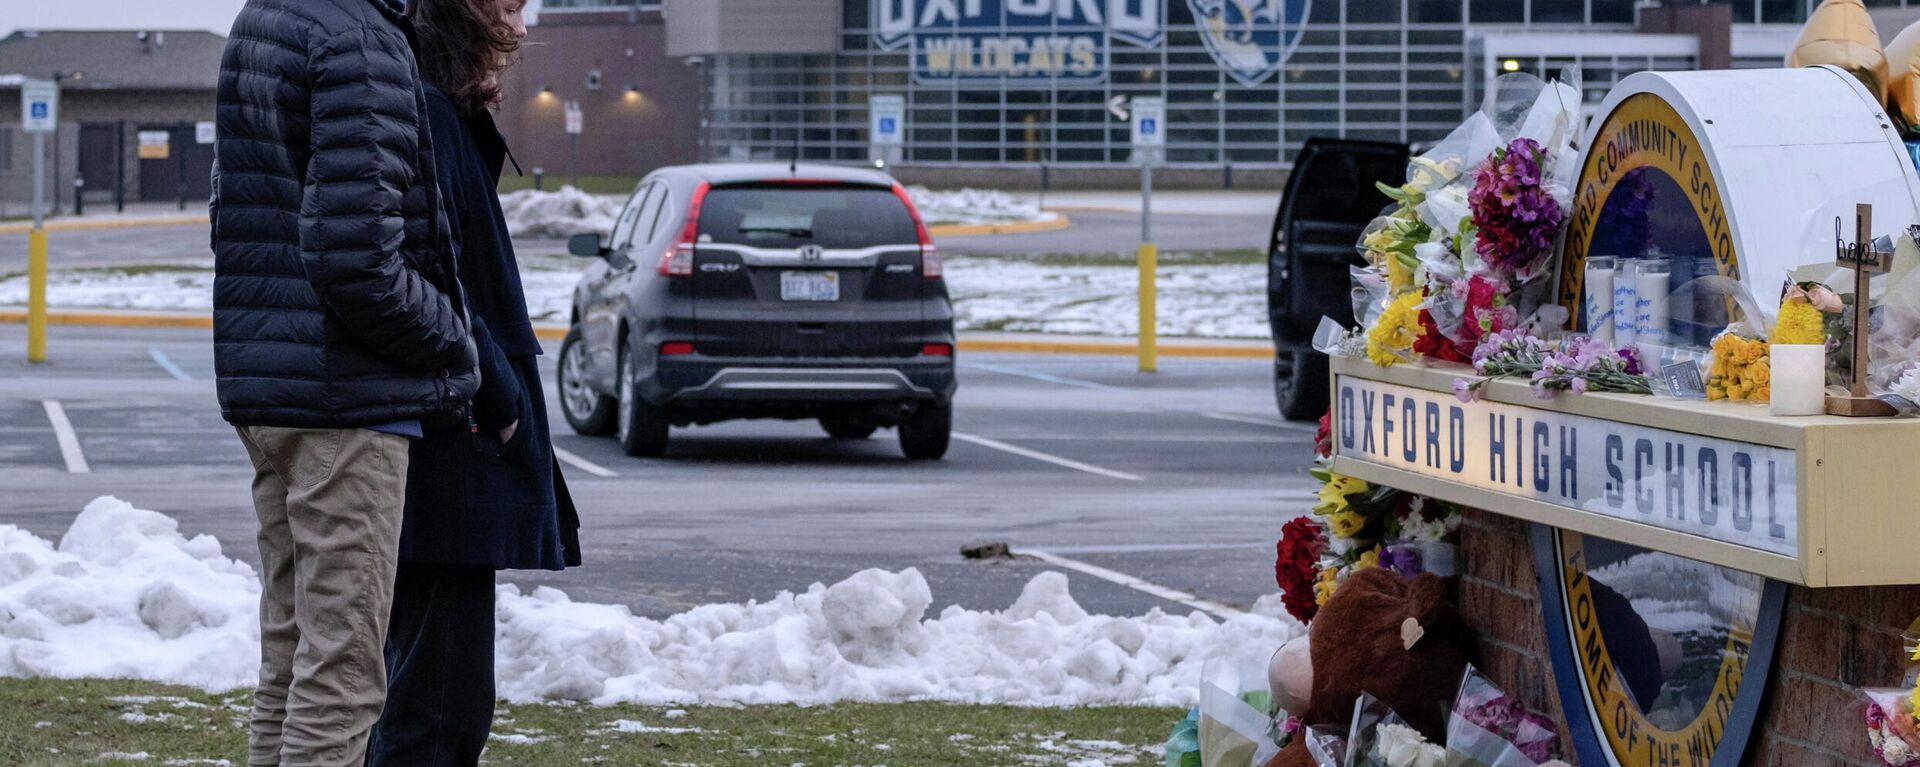 Students pay their respects at a memorial at Oxford High School a day after the year's deadliest U.S. school shooting which killed and injured several people, in Oxford, Michigan, U.S. December 1, 2021 - Sputnik International, 1920, 02.12.2021